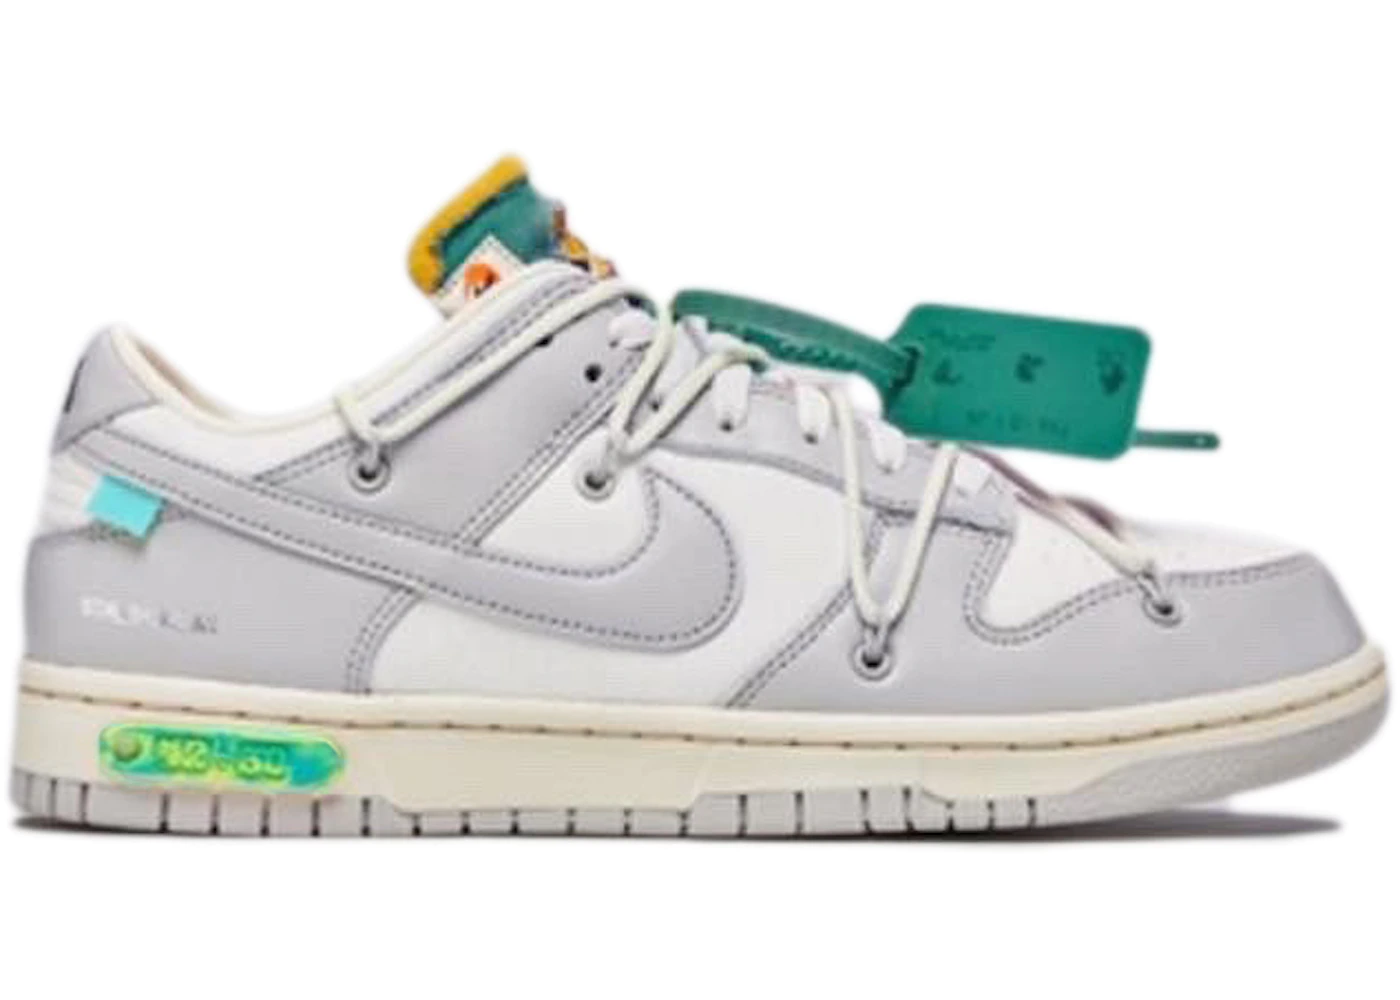 Nike Dunk dunks off white Low Off-White Lot 42 - DM1602-117 - US